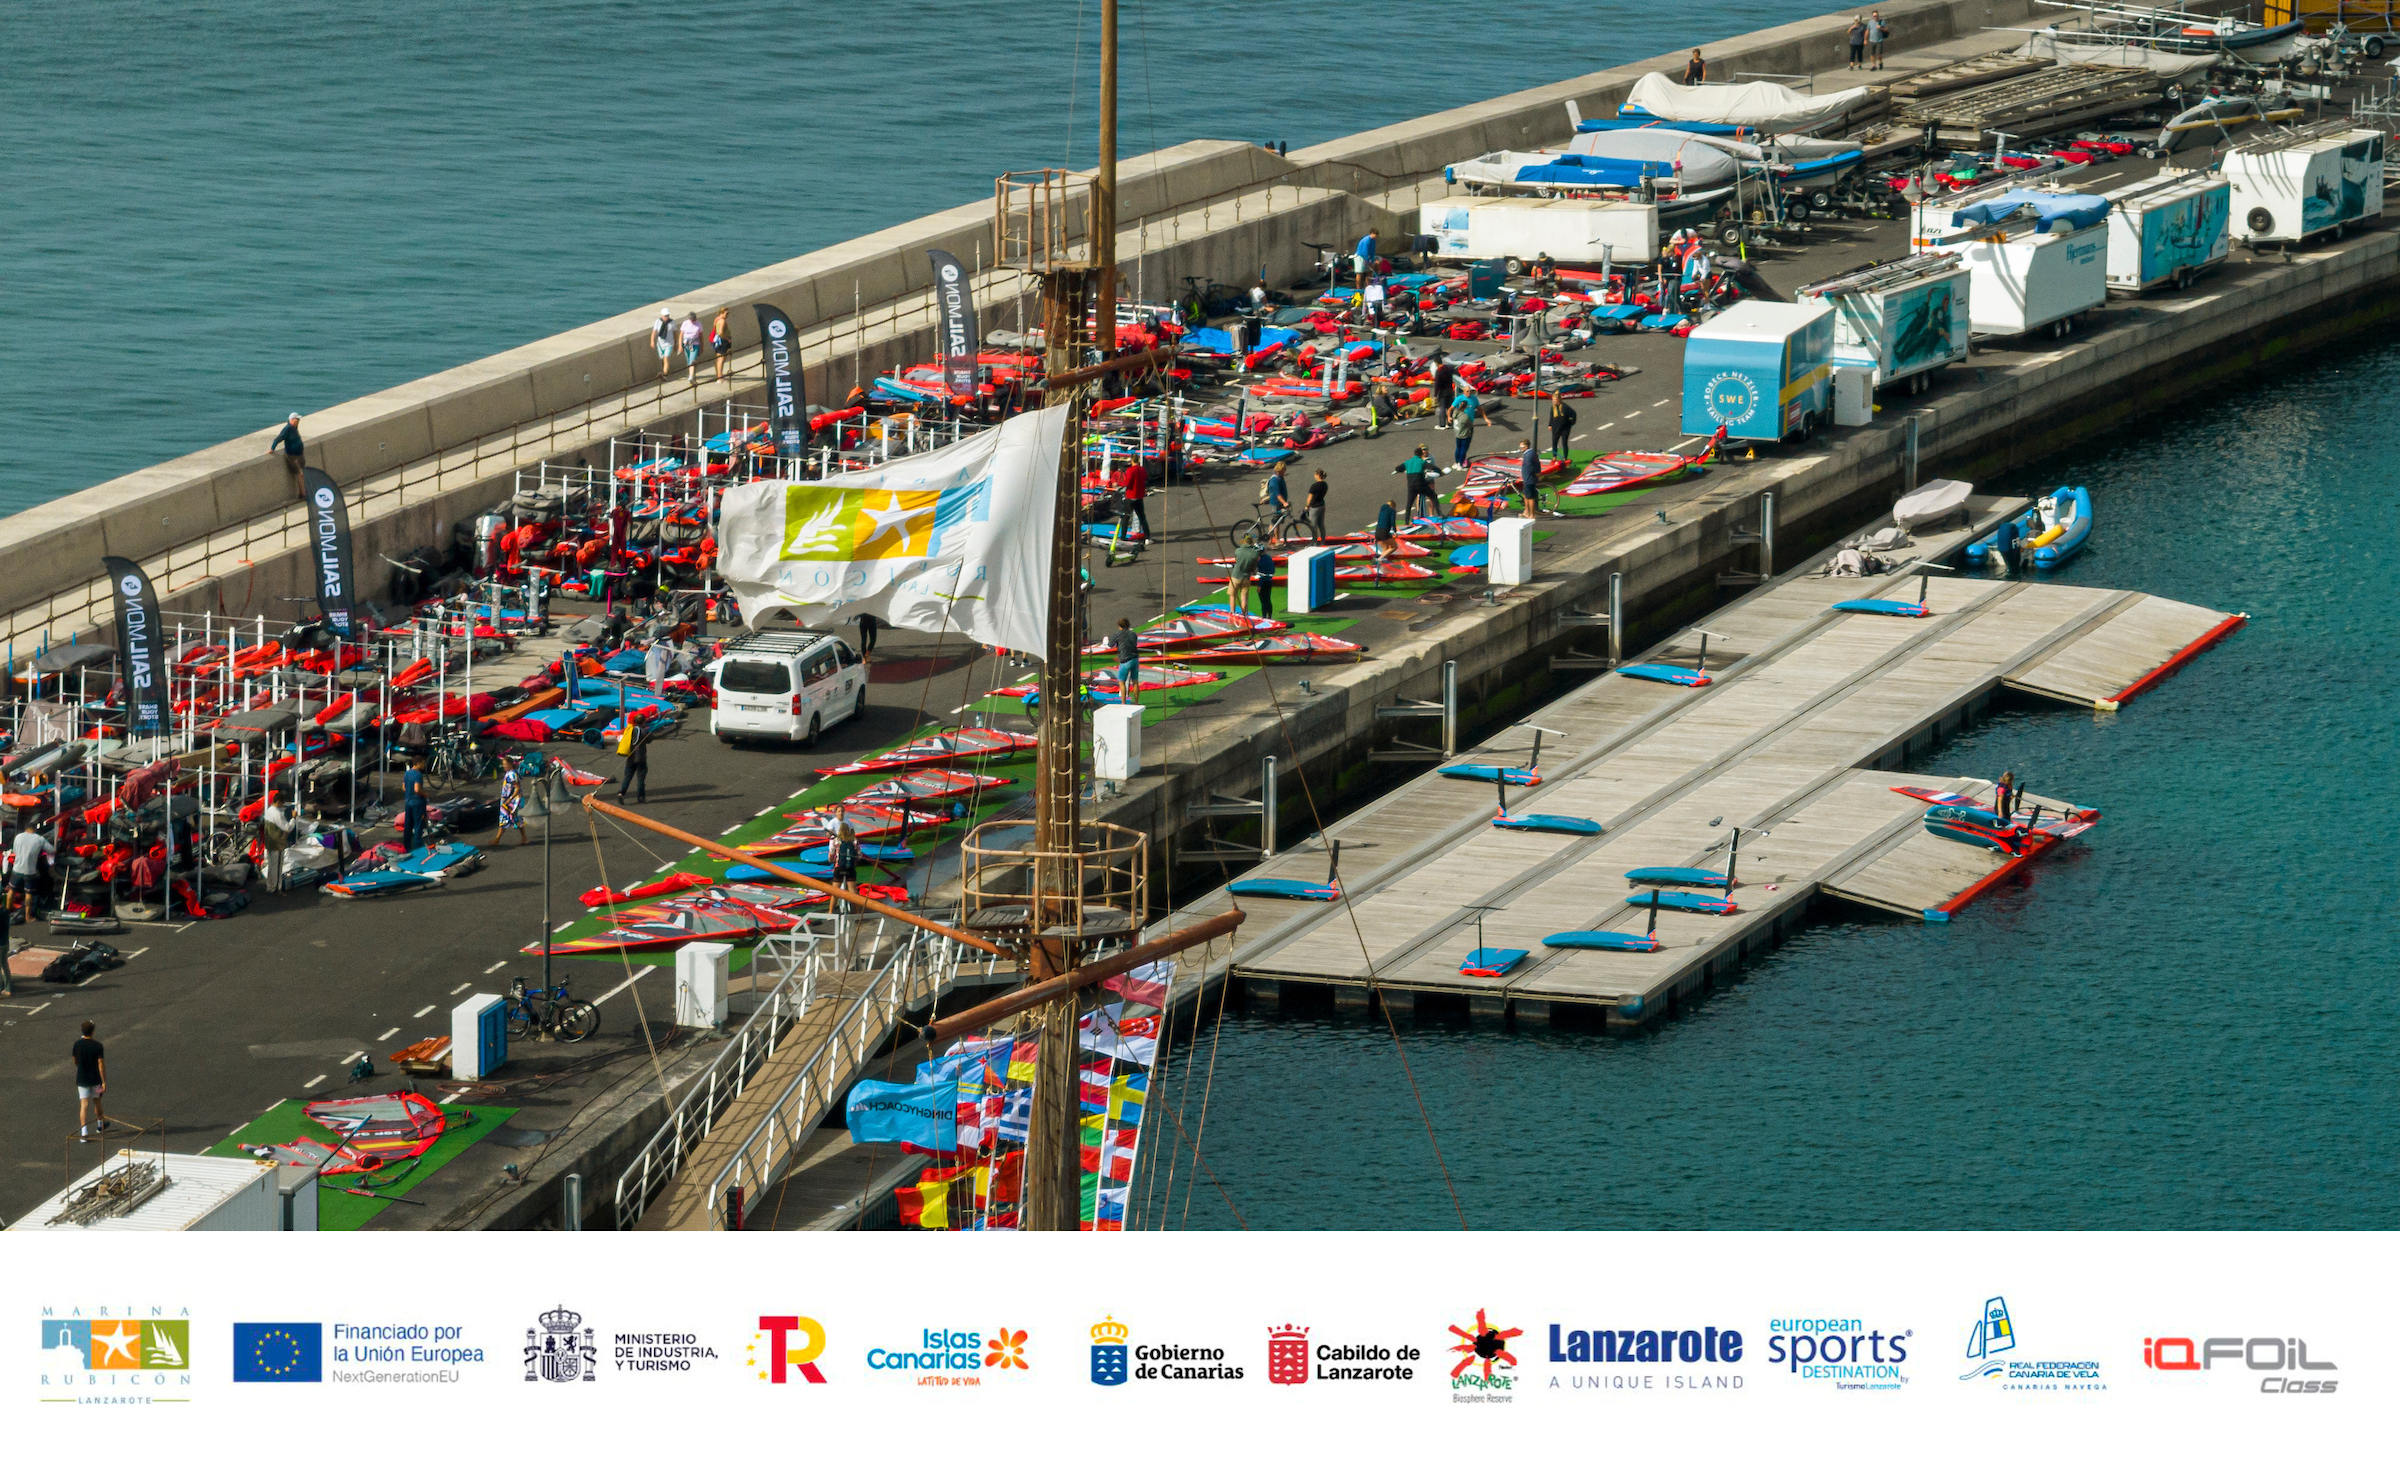 iQfoil Games Lanzarote 2023.
© Sailing Energy 
23 January, 2023